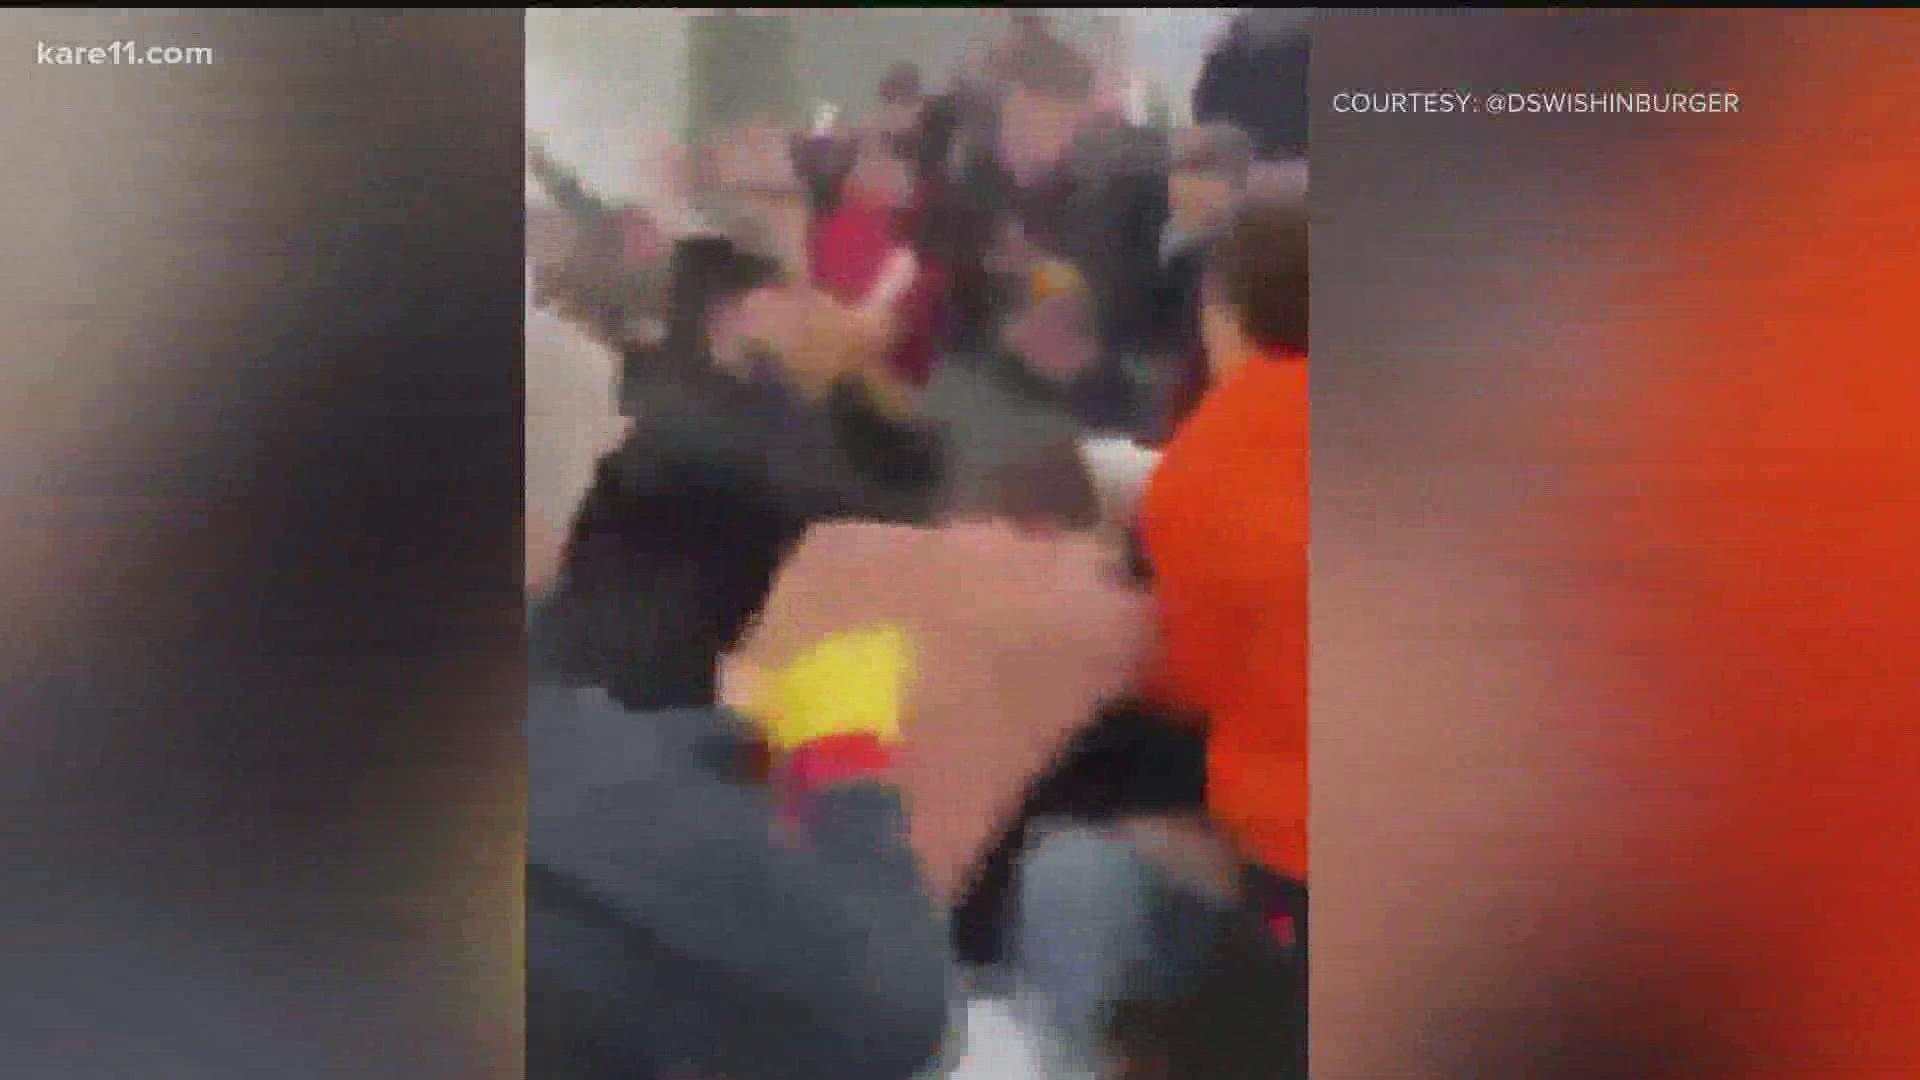 It's hard to pinpoint who exactly was involved in the fight, but witnesses say an adult got into an altercation with students in the White Bear Lake student section.